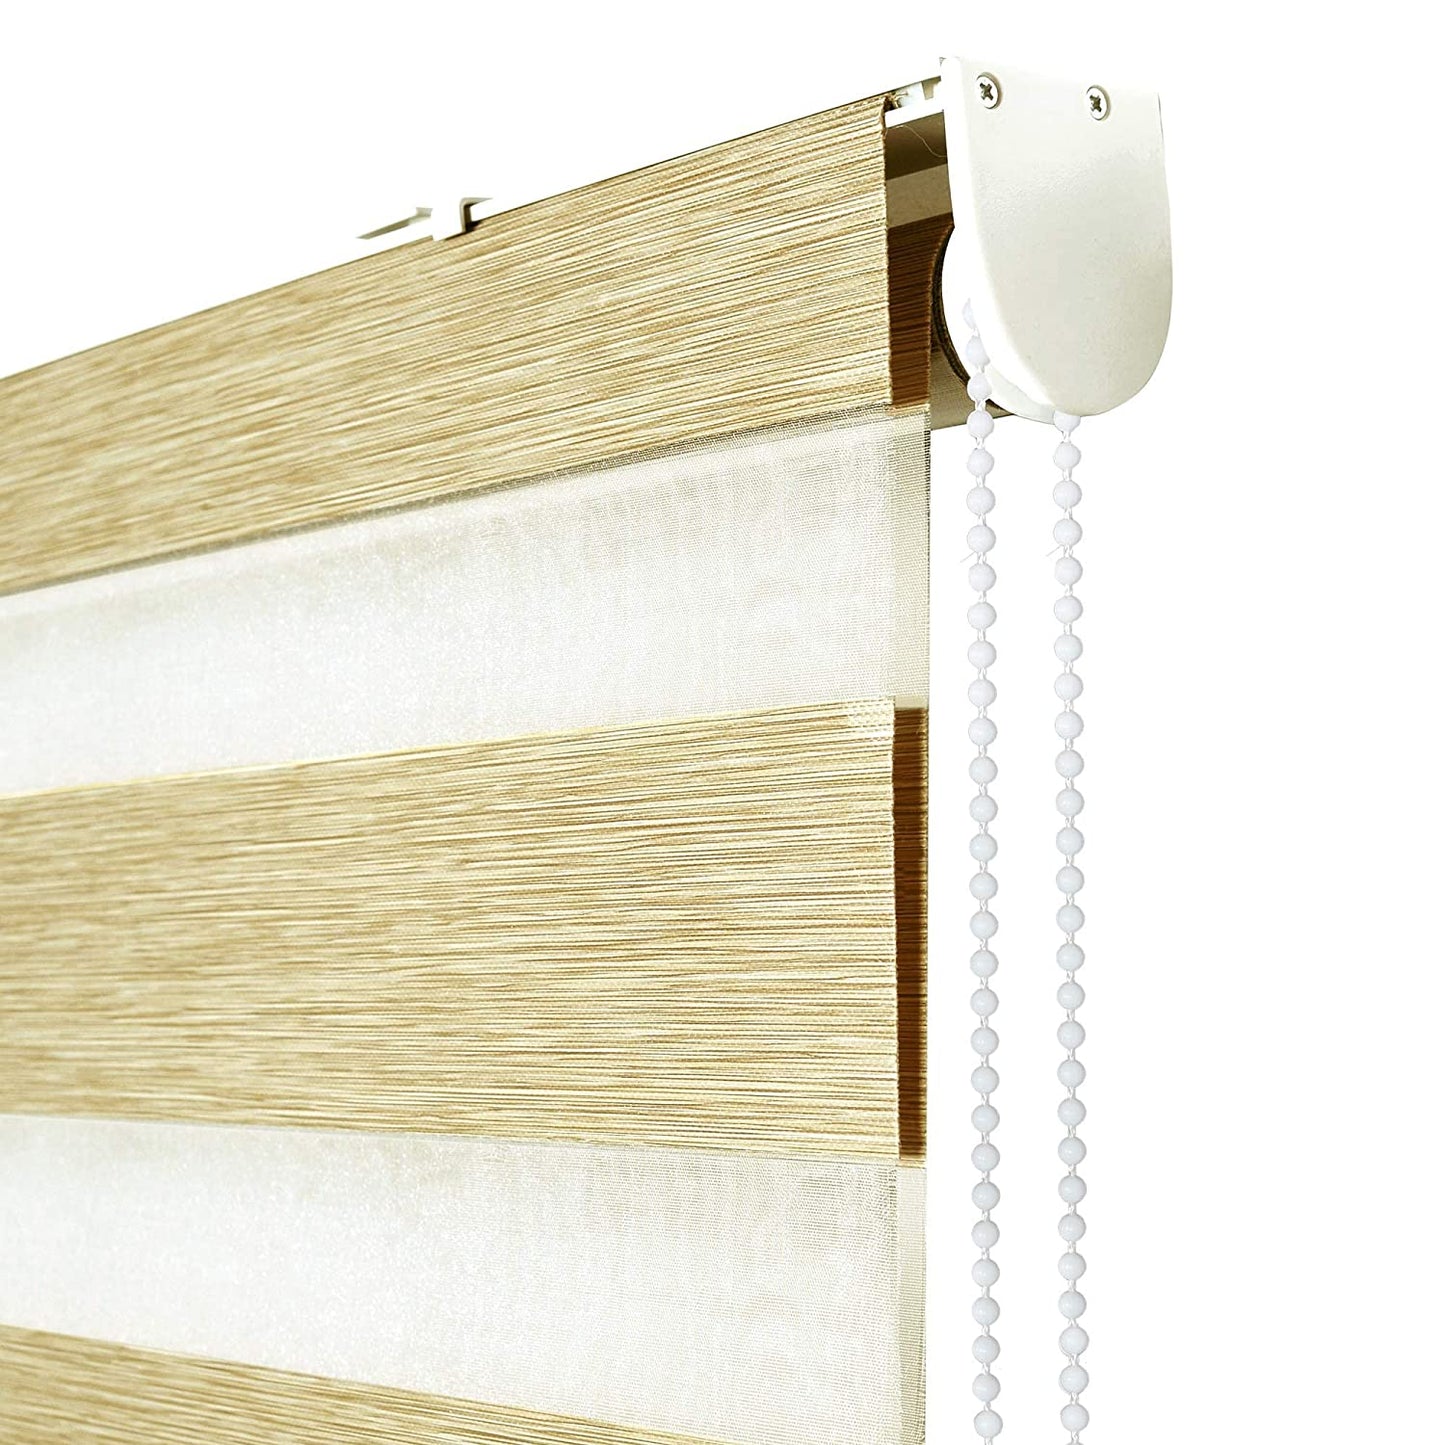 Buy Zebra Polyester Blinds for Windows or Outdoor Decor (Beige) Online at  Low Prices in India 